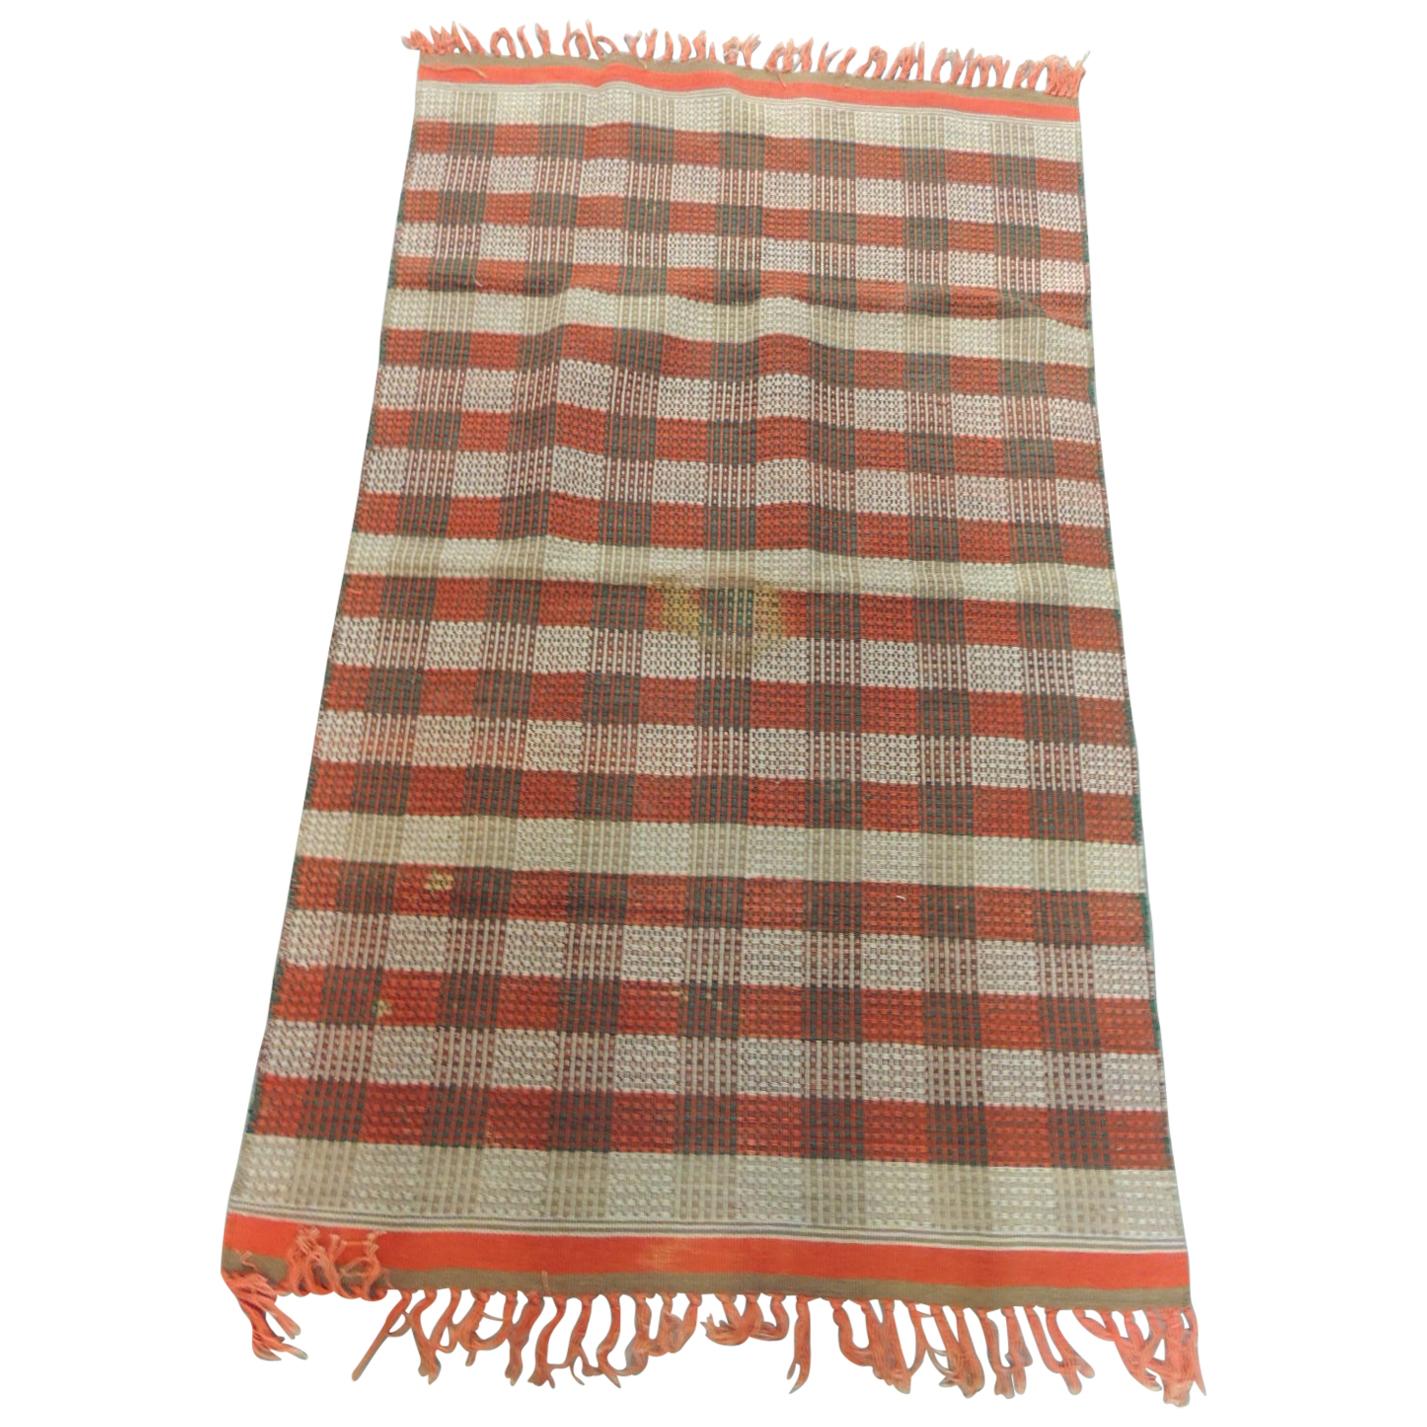 Plaid Indian Woven Rug or Throw (was never used on the floor)
Orange and green woven rug with small hand knotted fringes.
Size: 38